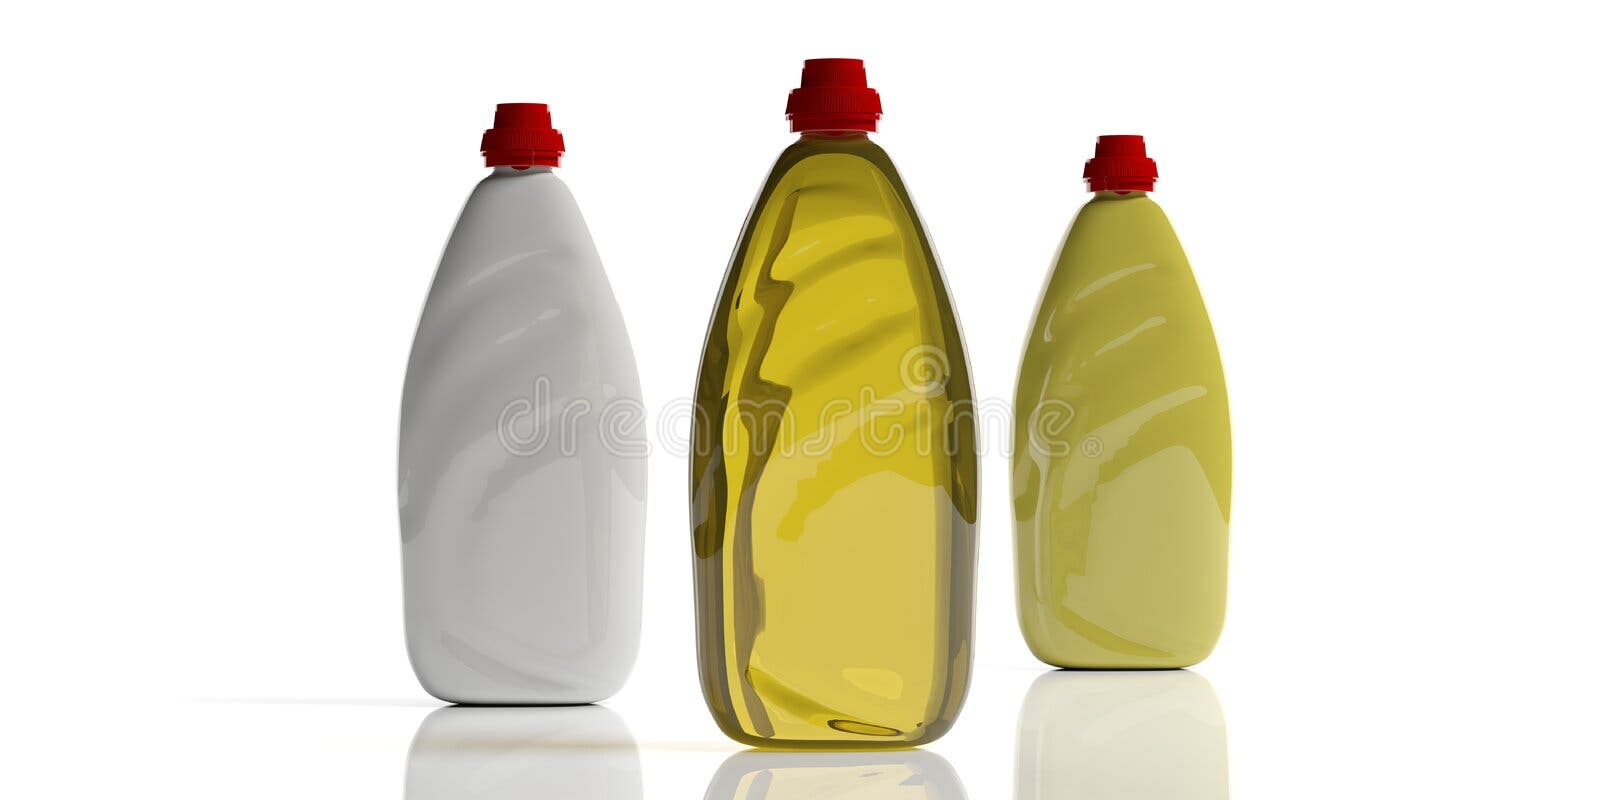 https://thumbs.dreamstime.com/b/dish-soap-dishwashing-detergent-blank-bottles-isolated-white-background-d-illustration-containers-liquid-plastic-139556392.jpg?w=1600